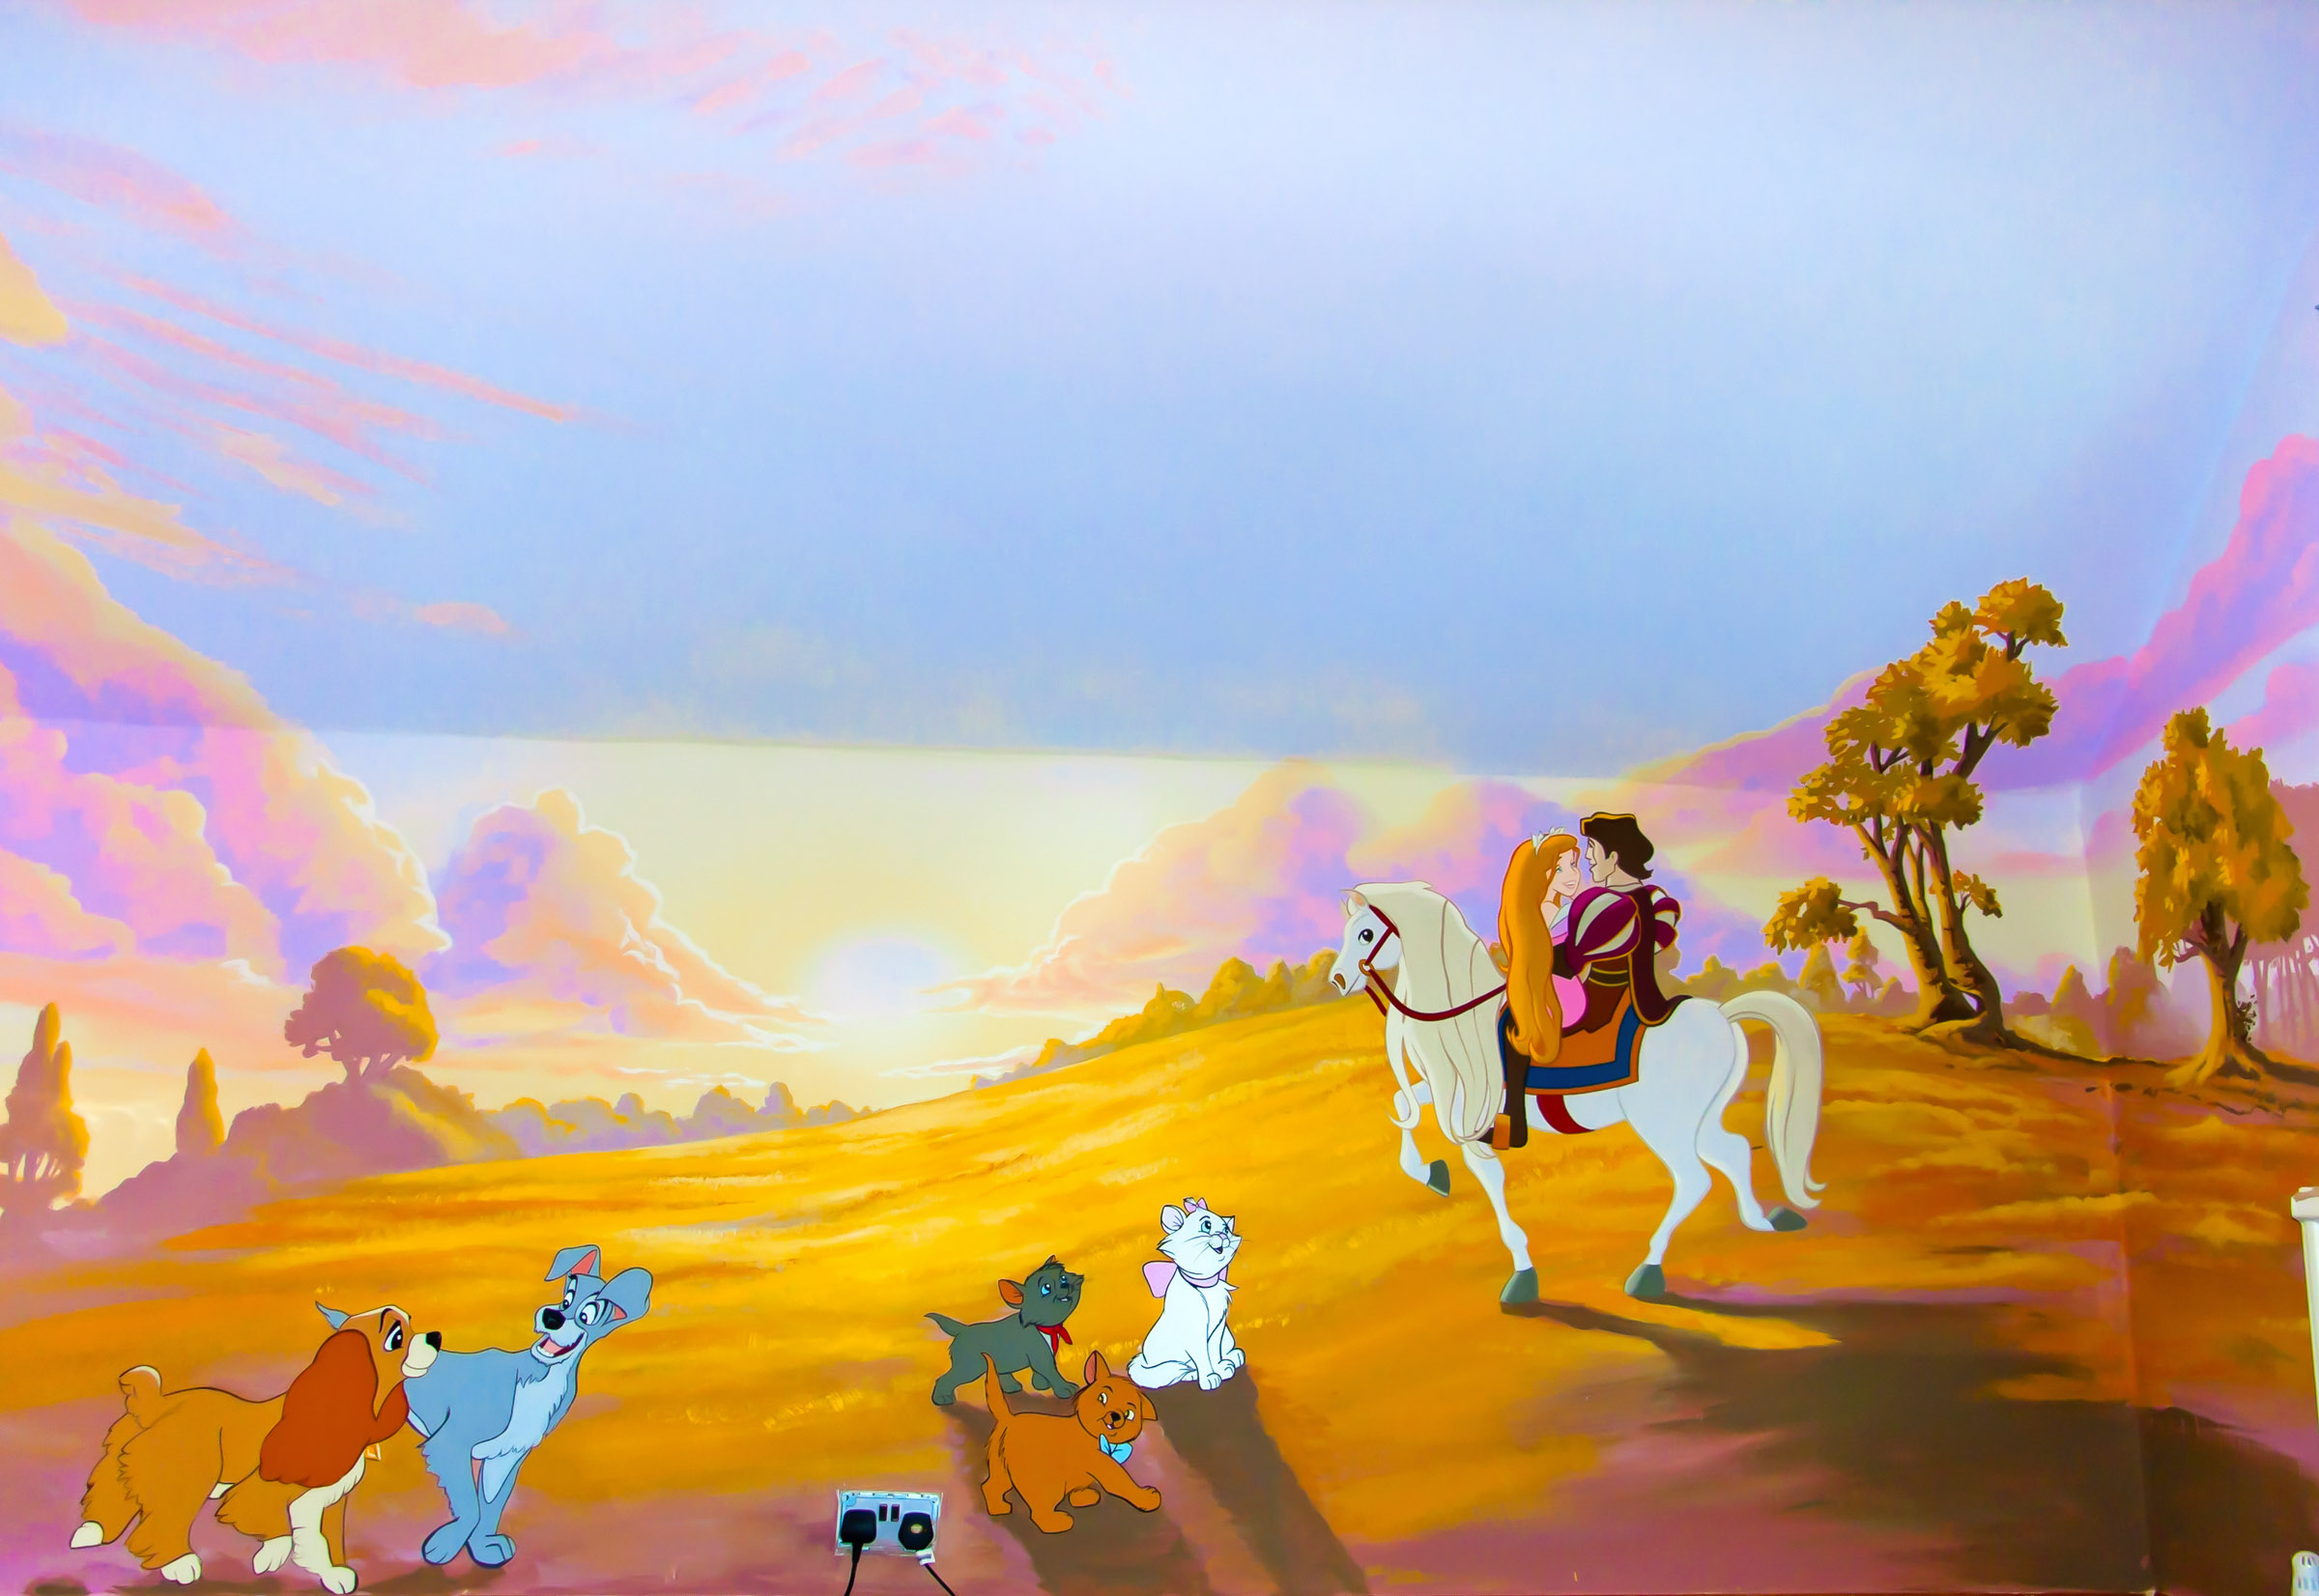 Disney Mural Enchanted Sunset wall with appearances from Lady and the Tramp, and the Aristocats' kittens